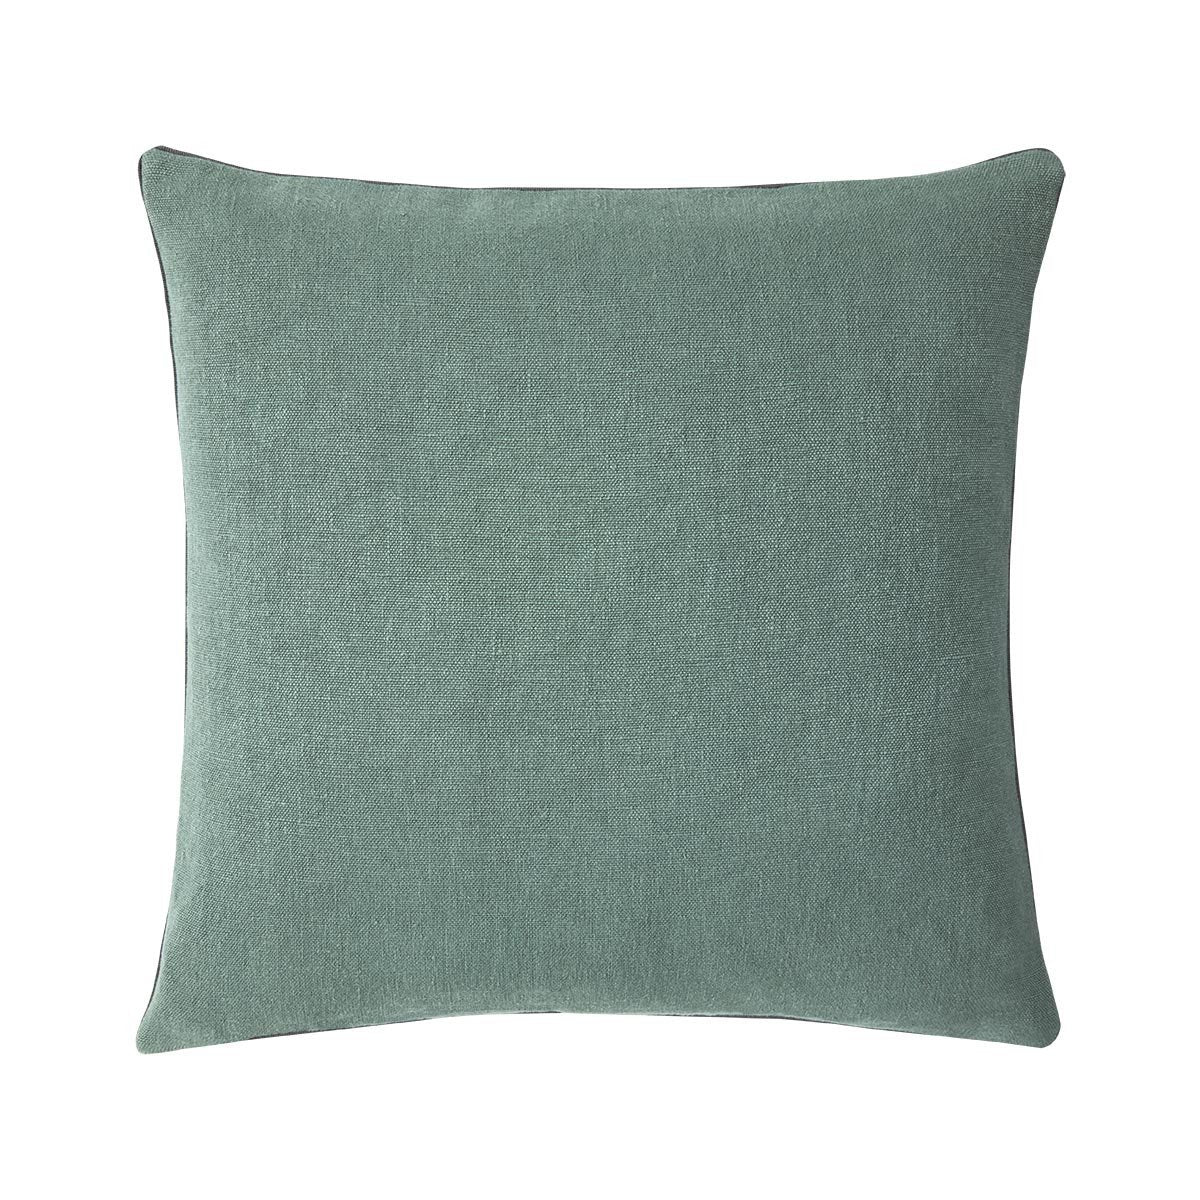 Pigment Mousse Square Decorative Pillows by Iosis